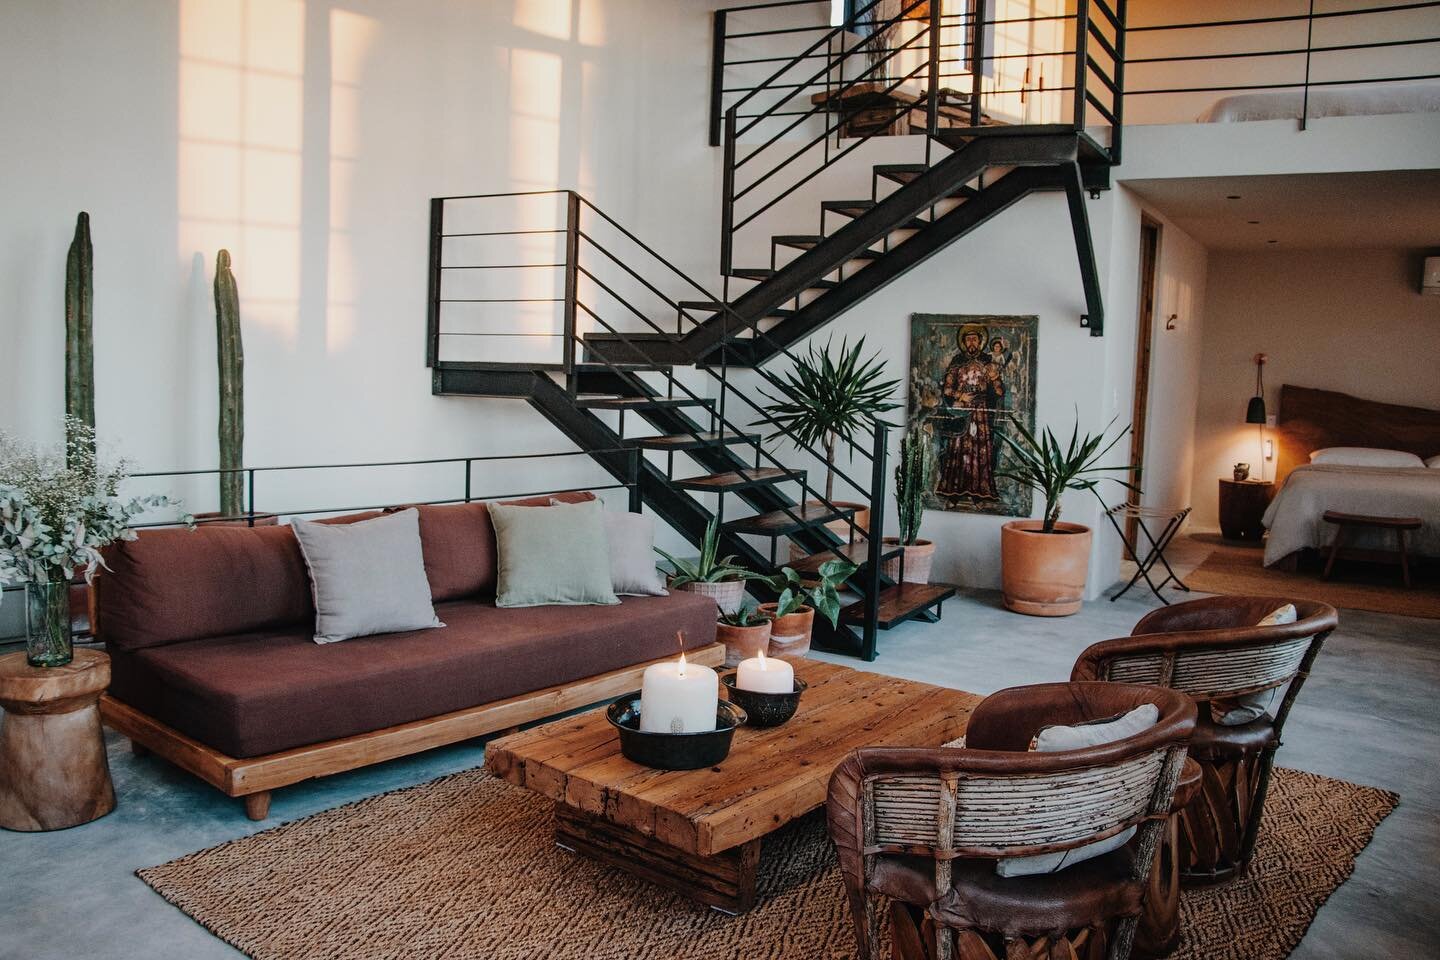 Looking for an exquisite winter retreat? Casa Lenno is a one of a kind property located within walking distance to the historic center of San Miguel de Allende. 
 
This 1000 sq ft living space is meant to make you feel at home. The dramatic ceiling h